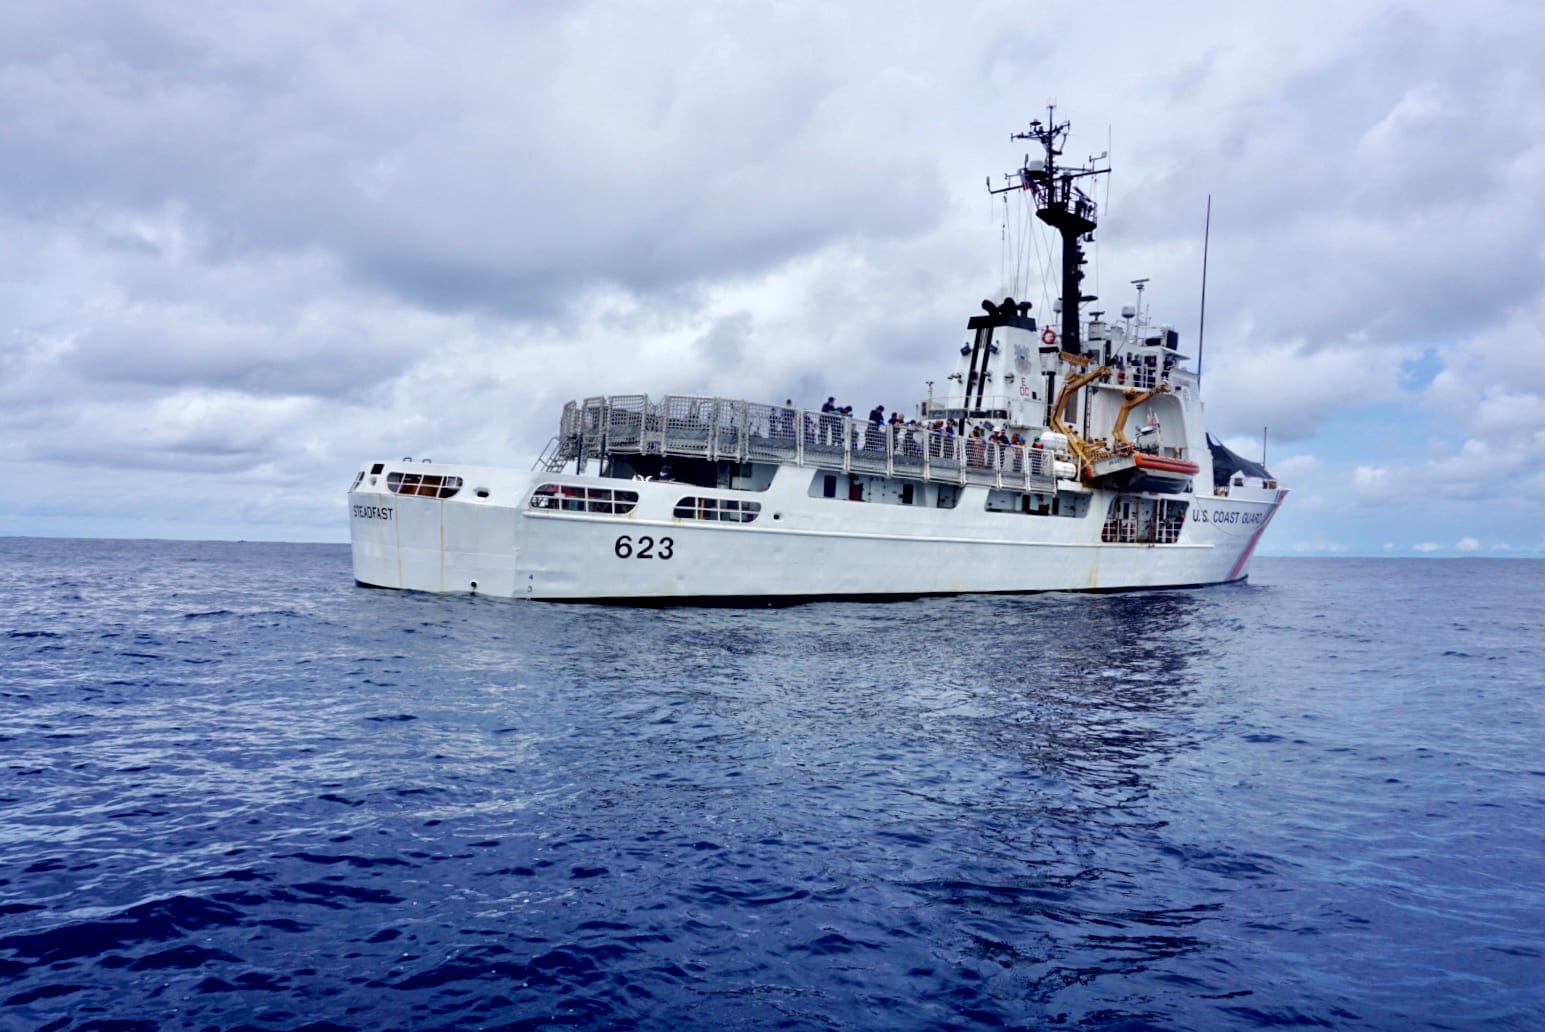 Steadfast returns to homeport after counter-narcotics patrol